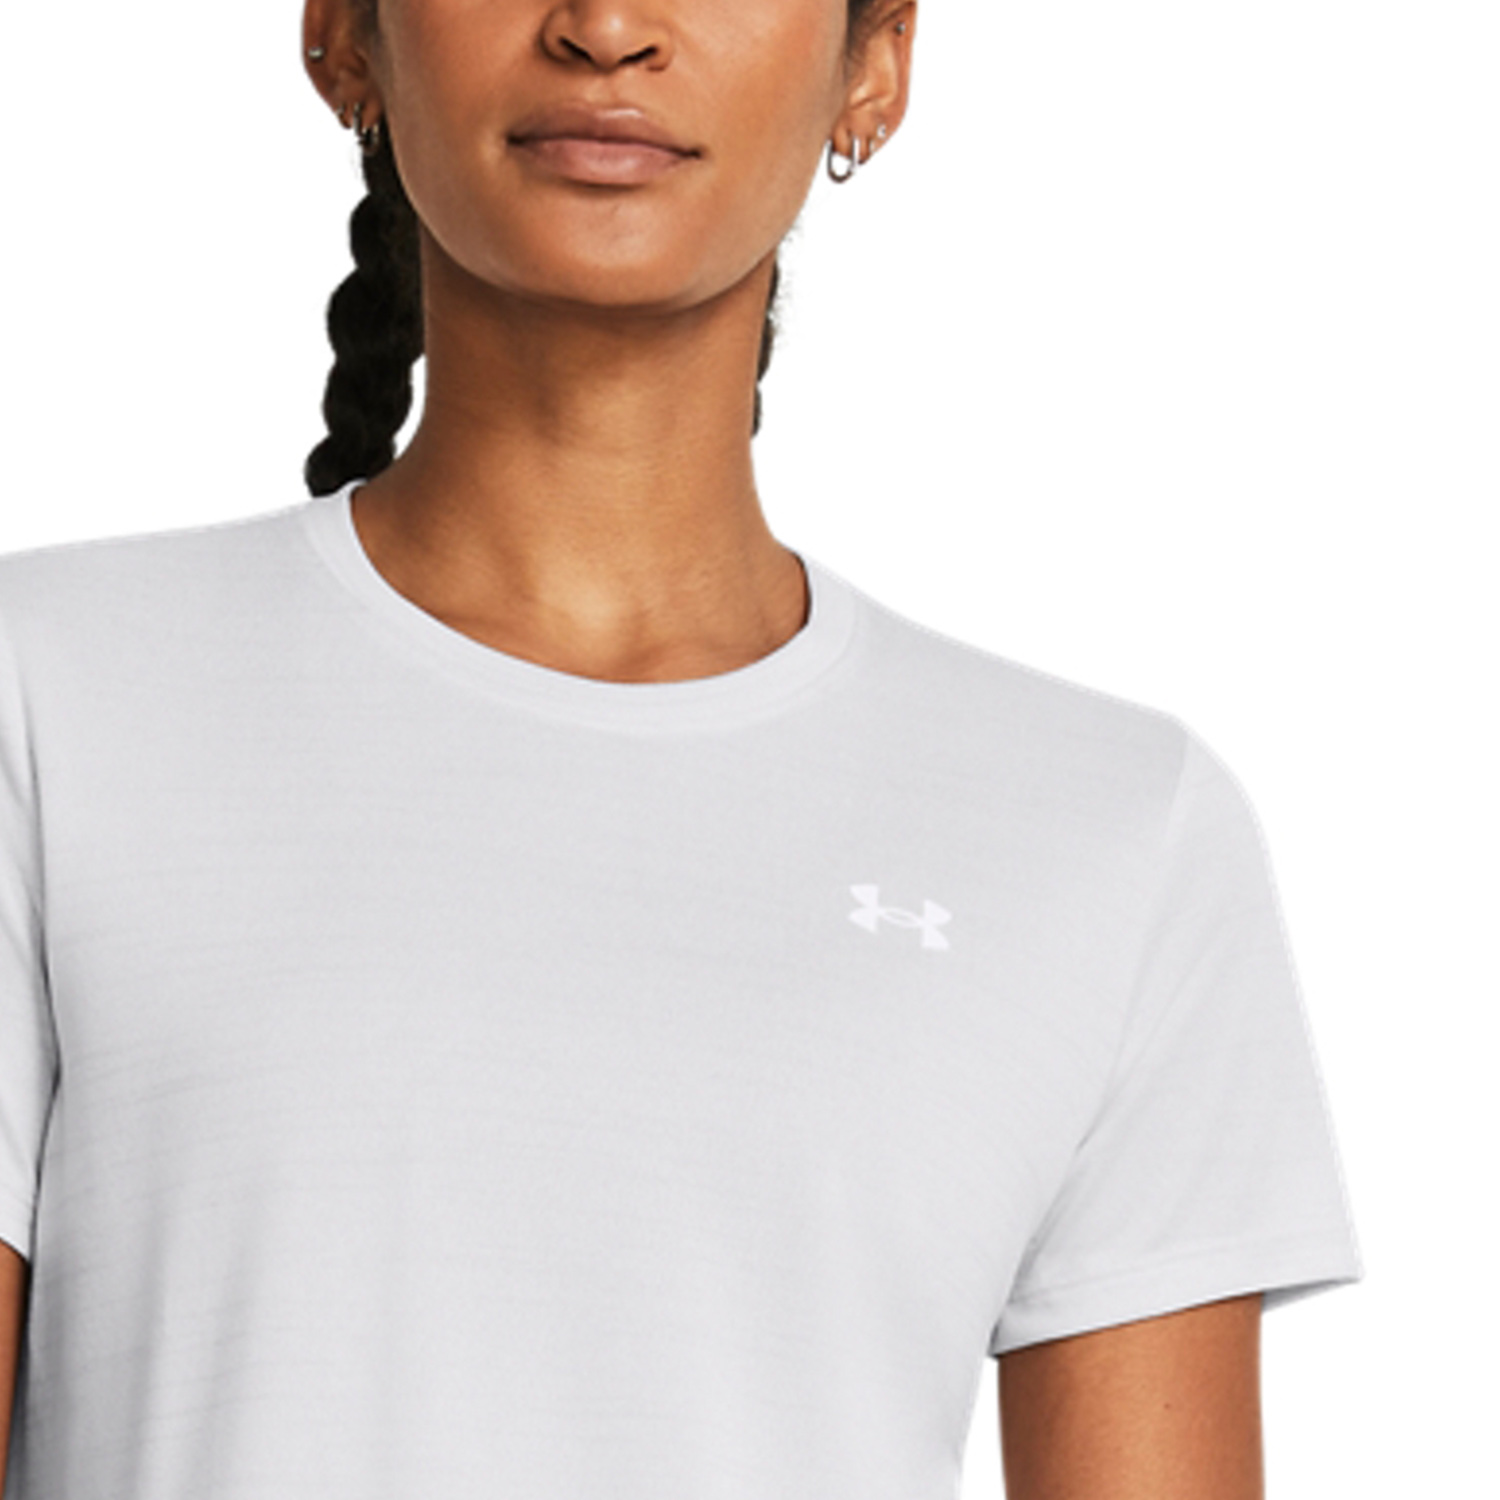 Under Armour Tech Tiger T-Shirt - Halo Gray/White